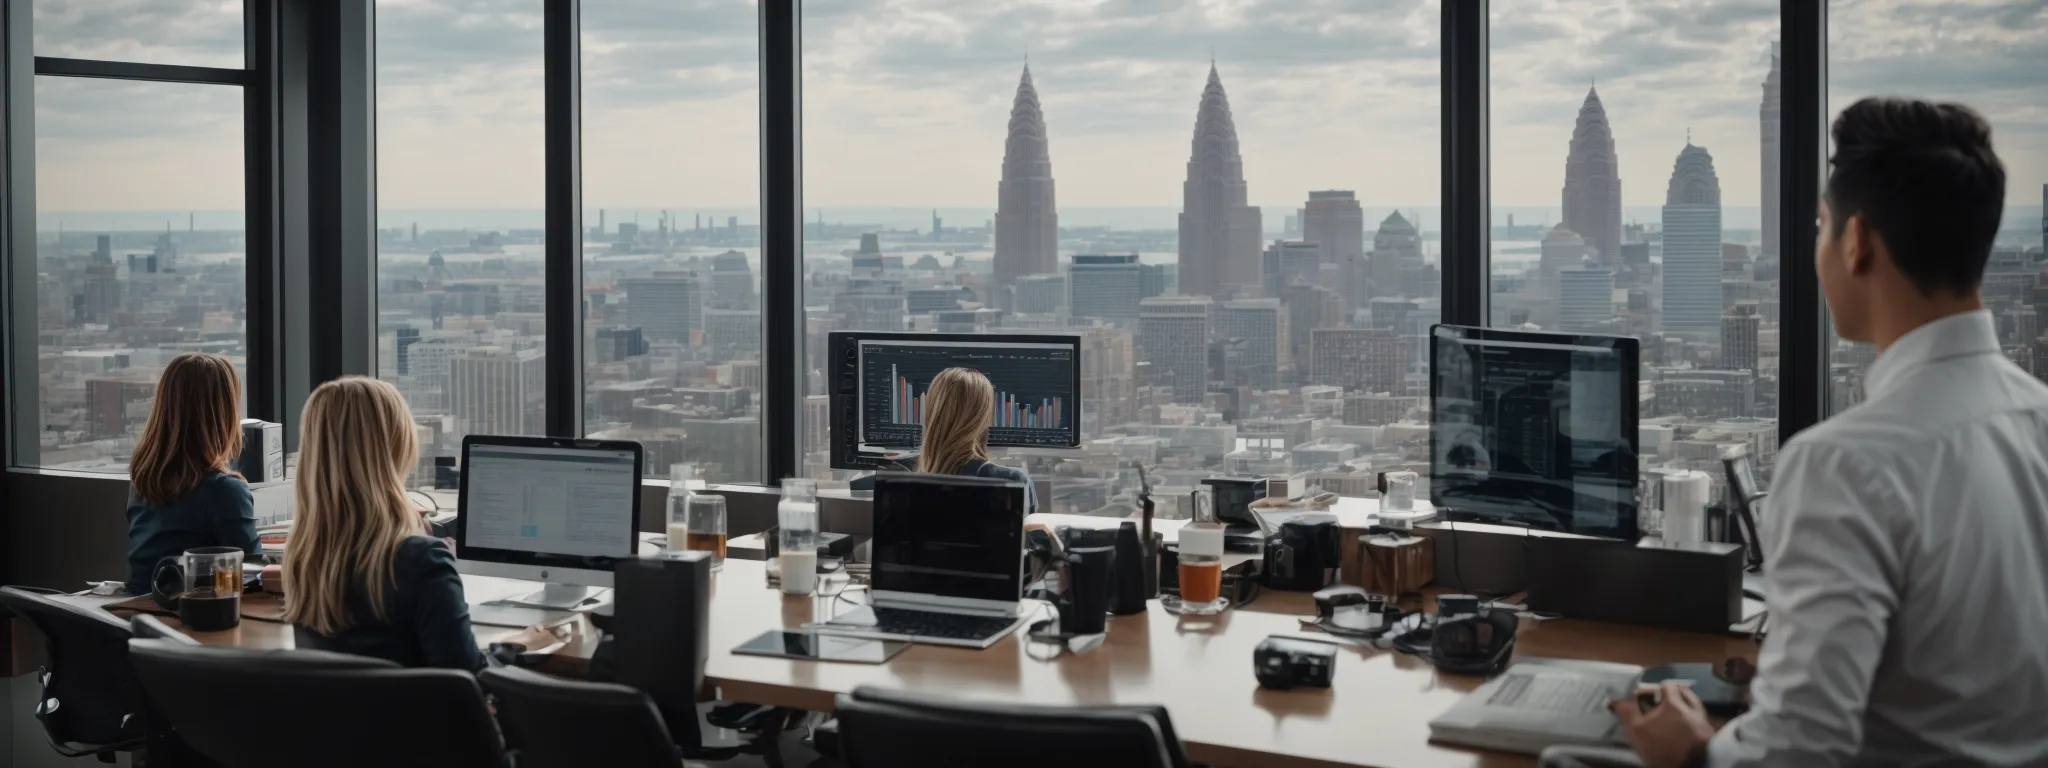 a professional team conducts an seo strategy meeting amidst the cleveland skyline, focusing on a computer screen displaying website analytics.